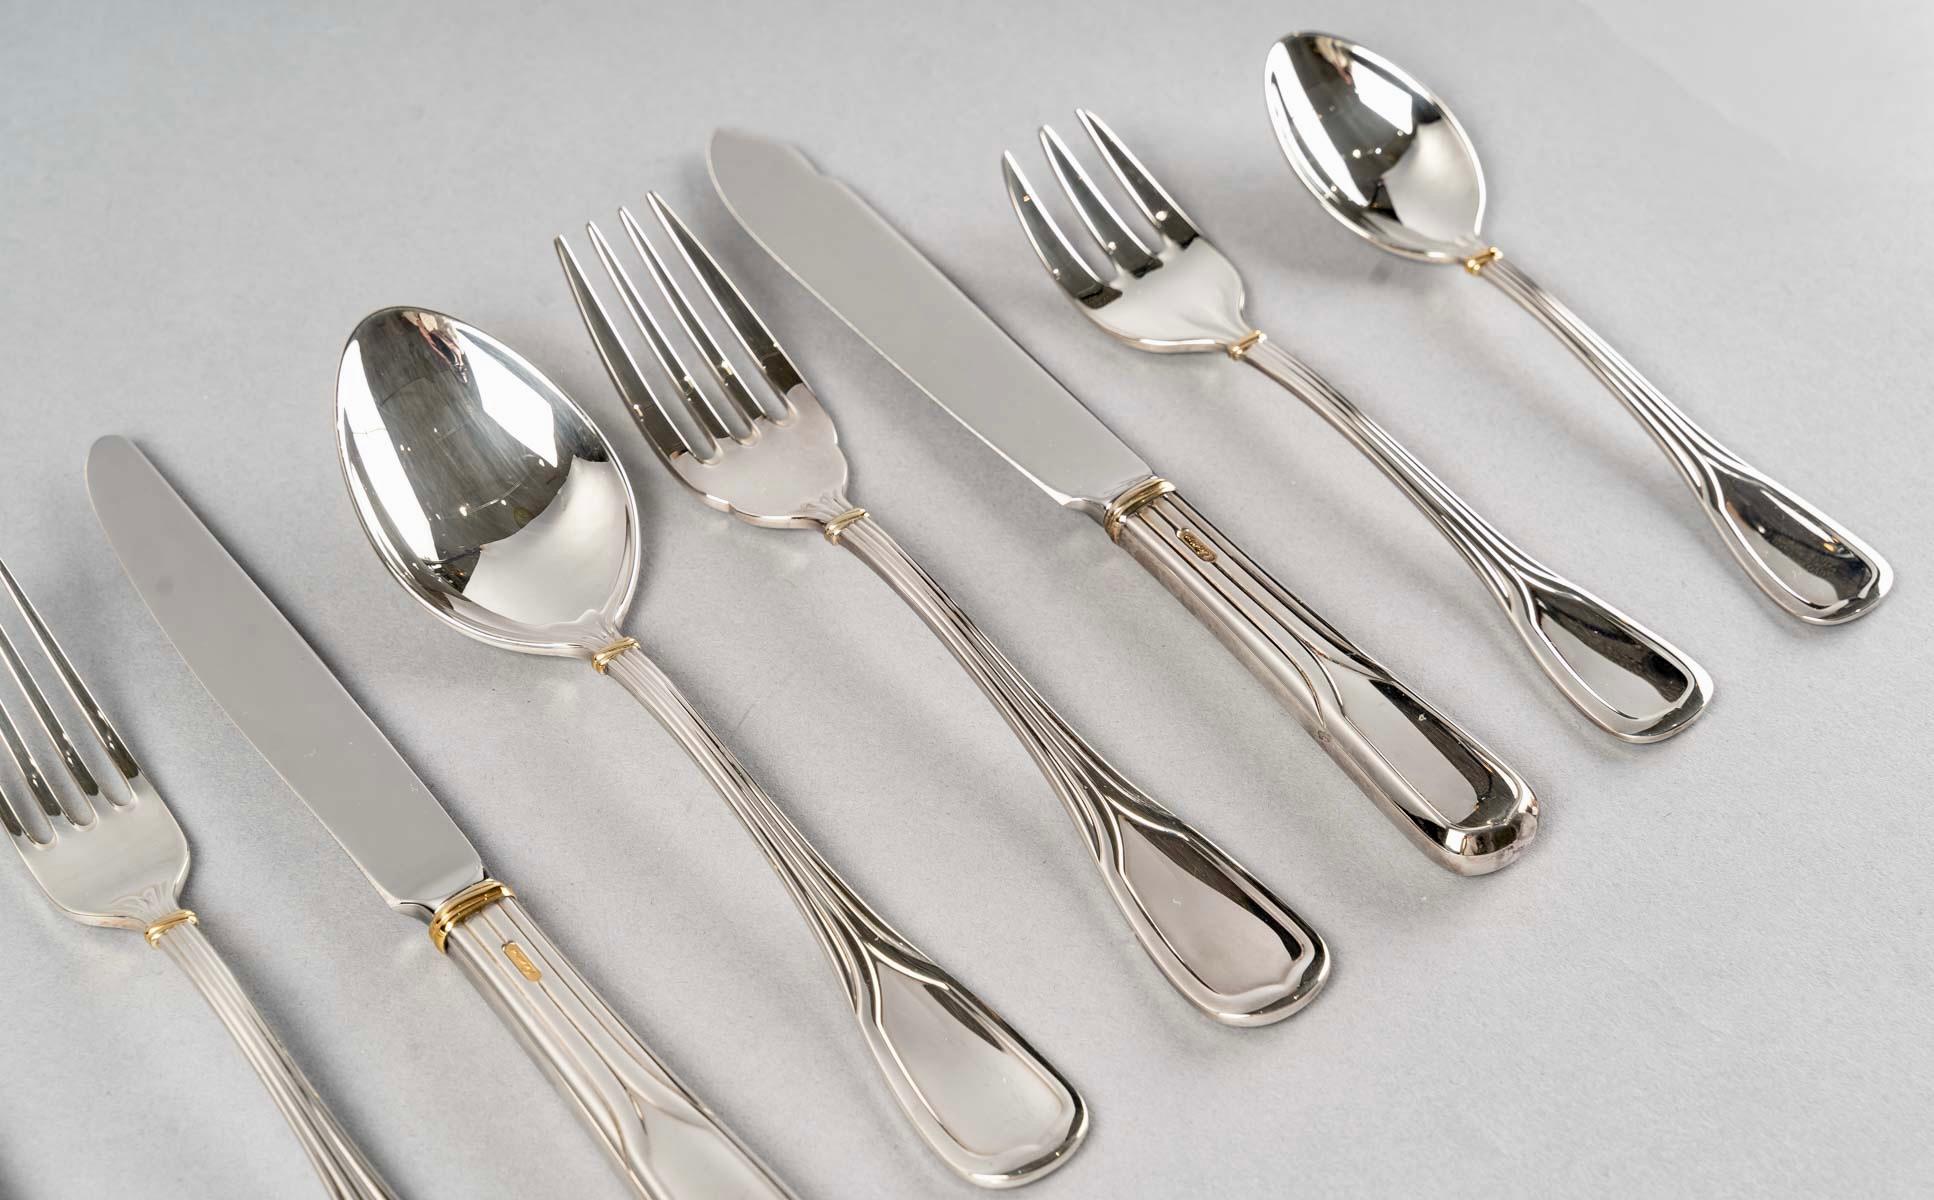 Flatware Cutlery Set “La Maison du Prince” made in plated silver by Cartier in 1988.
Each piece is signed “Cartier” in a golden cartouche.

Excellent condition. All the pieces are in box.

110-piece Cartier Set including:
- 12 table forks
-